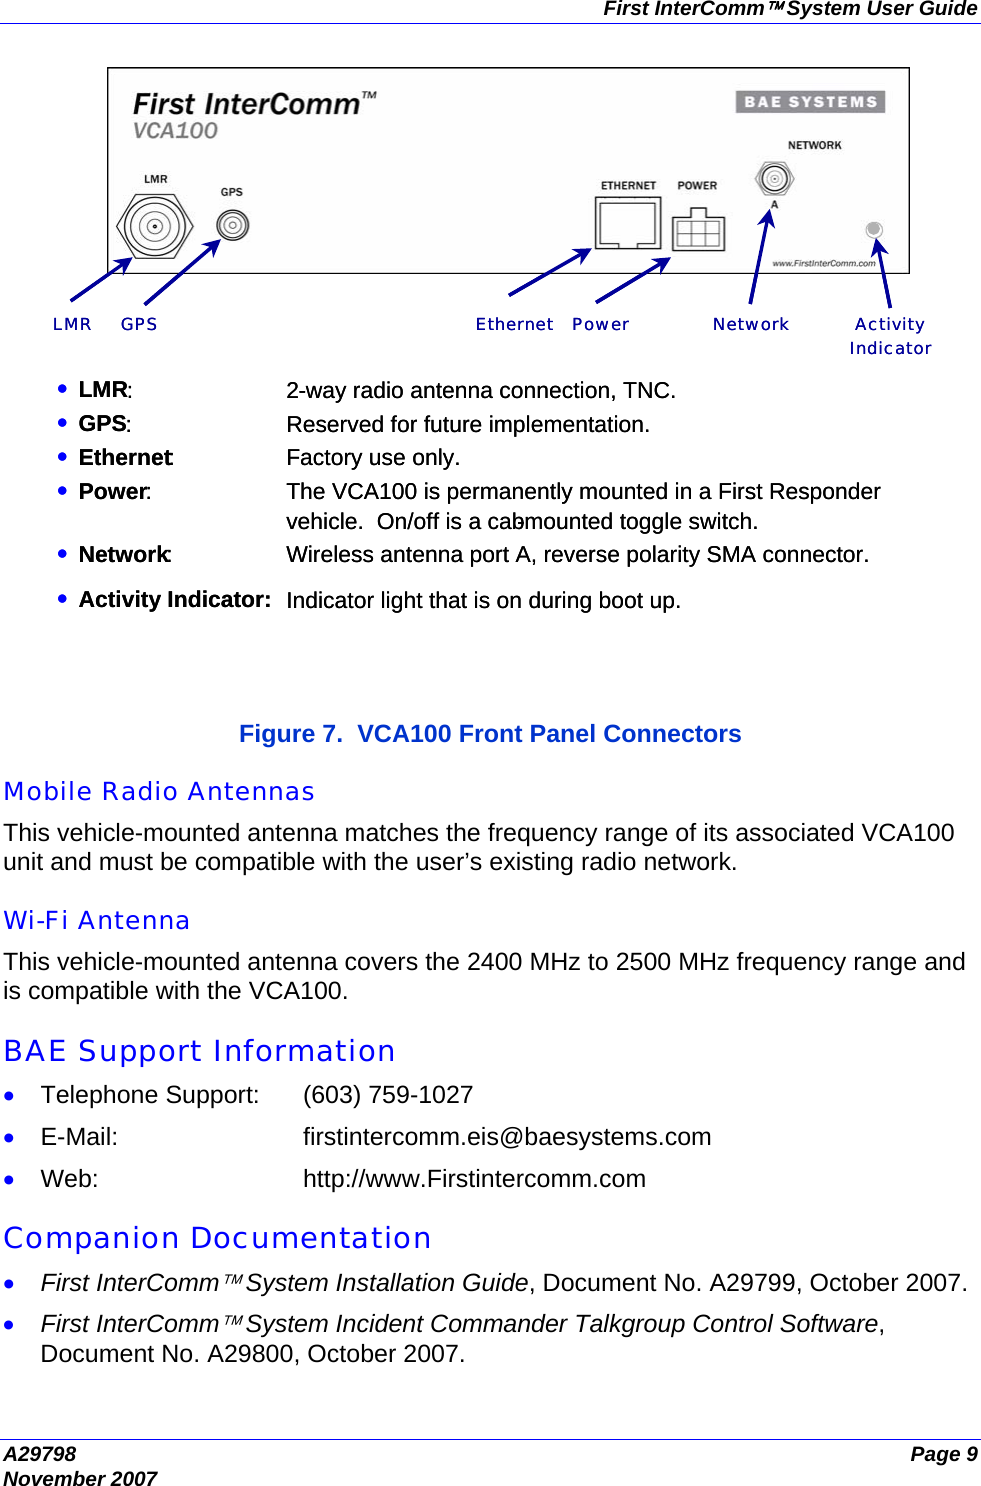 First InterComm™ System User Guide A29798  Page 9 November 2007  Figure 7.  VCA100 Front Panel Connectors  Mobile Radio Antennas This vehicle-mounted antenna matches the frequency range of its associated VCA100 unit and must be compatible with the user’s existing radio network.  Wi-Fi Antenna This vehicle-mounted antenna covers the 2400 MHz to 2500 MHz frequency range and is compatible with the VCA100.  BAE Support Information • Telephone Support:  (603) 759-1027 • E-Mail: firstintercomm.eis@baesystems.com • Web: http://www.Firstintercomm.com  Companion Documentation • First InterComm™ System Installation Guide, Document No. A29799, October 2007. • First InterComm™ System Incident Commander Talkgroup Control Software, Document No. A29800, October 2007. • LMR : 2 - way radio antenna connection, TNC.• GPS : Reserved for future implementation.• Ethernet : Factory use only.• Power : The VCA100 is permanently mounted in a First Responder vehicle.  On/off is a cab-mounted toggle switch. • Network : Wireless antenna port A, reverse polarity SMA connector. • Activity Indicator: Indicator light that is on during boot up.Ethernet ActivityIndicatorPowerLMR GPS Network • LMR : 2 - way radio antenna connection, TNC.• GPS : Reserved for future implementation.• Ethernet : Factory use only.• Power : The VCA100 is permanently mounted in a First Responder vehicle.  On/off is a cab-mounted toggle switch. • Network : Wireless antenna port A, reverse polarity SMA connector. • Activity Indicator: Indicator light that is on during boot up. Ethernet ActivityIndicatorPowerLMR GPS Network 